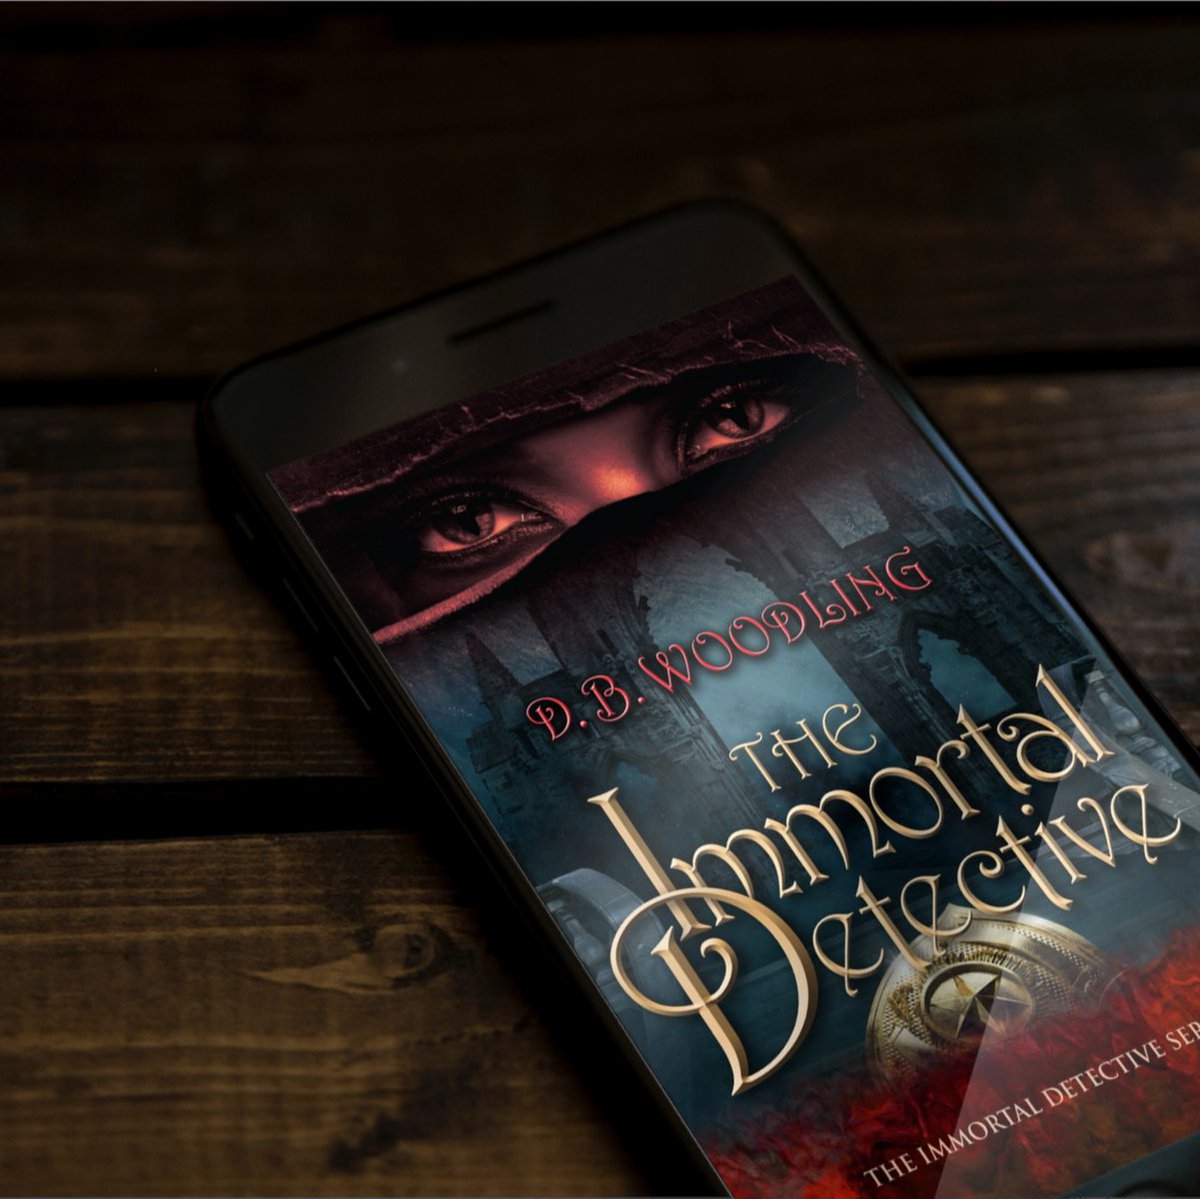 This #Paranormal #DetectiveMystery has readers excited. If you're ready for a new, original, fresh, fascinating and fun take on the #VampireGenre. #TheImmortalDetective by #DBWoodling is a #MustRead! Find it at @celticlady1953 👉 bit.ly/489qGFe #BookRec @DBWoodling